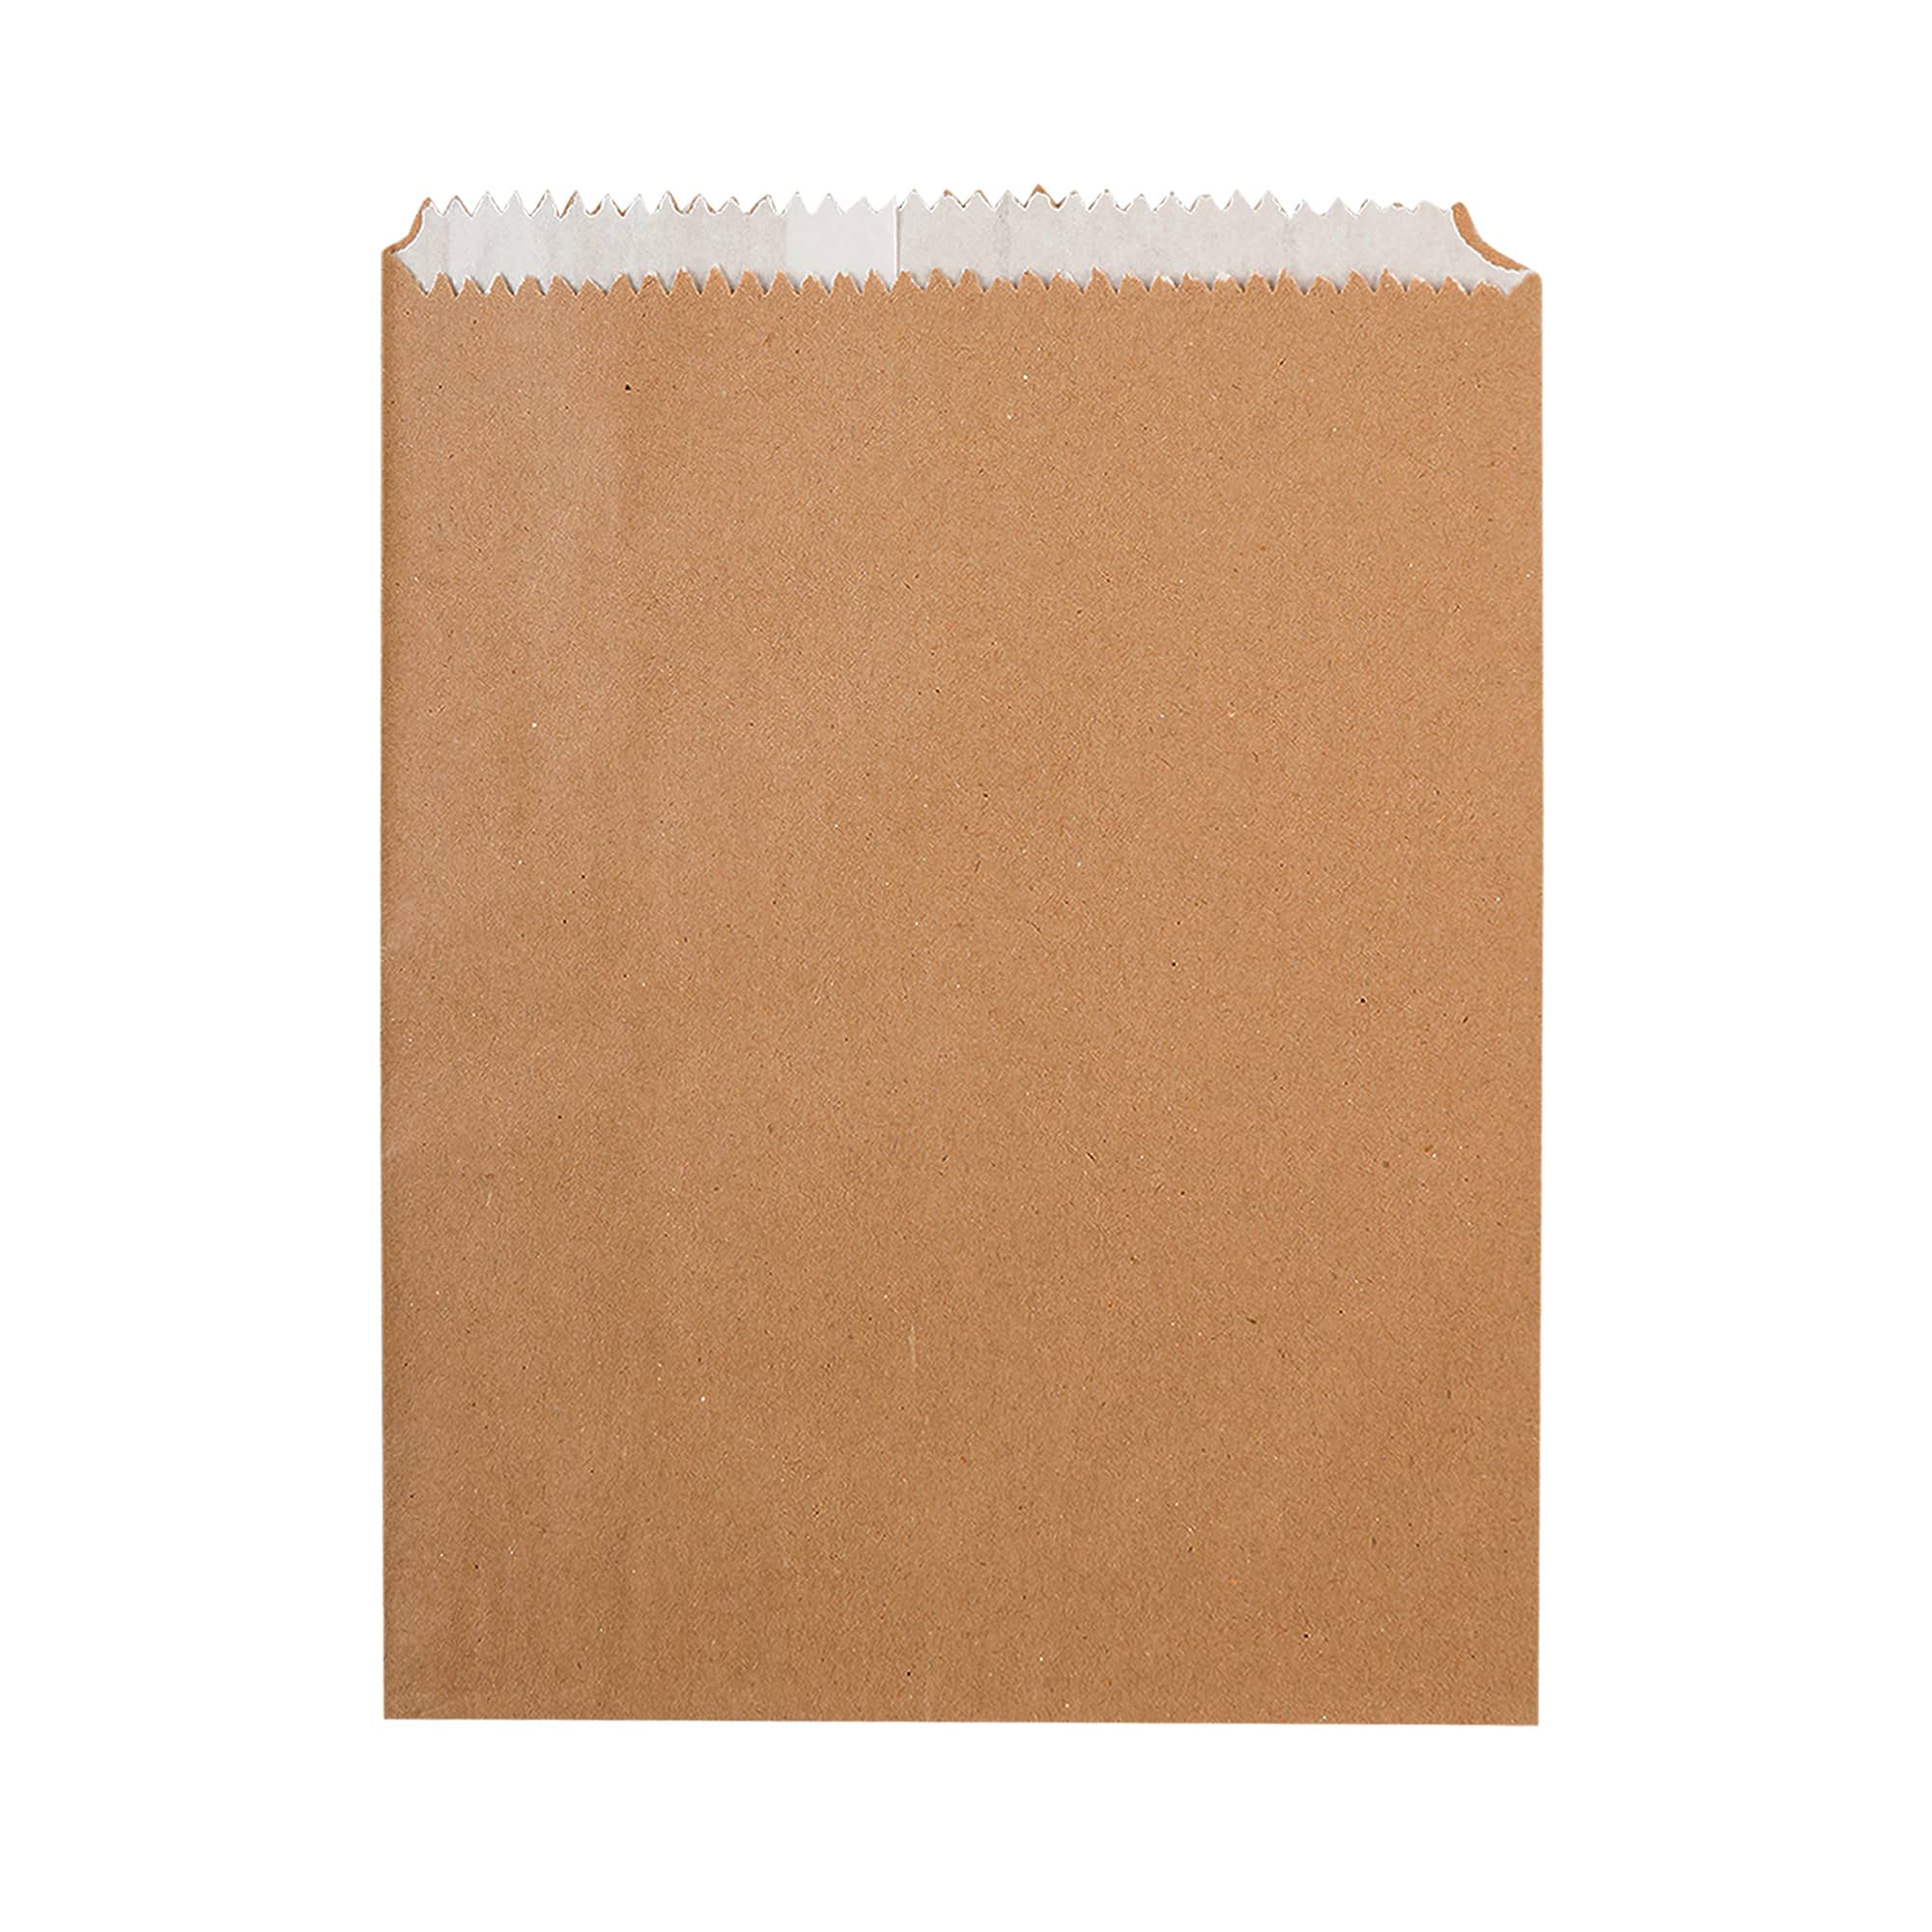 Double Layer paper pouch for oily food packaging coated with OGR paper